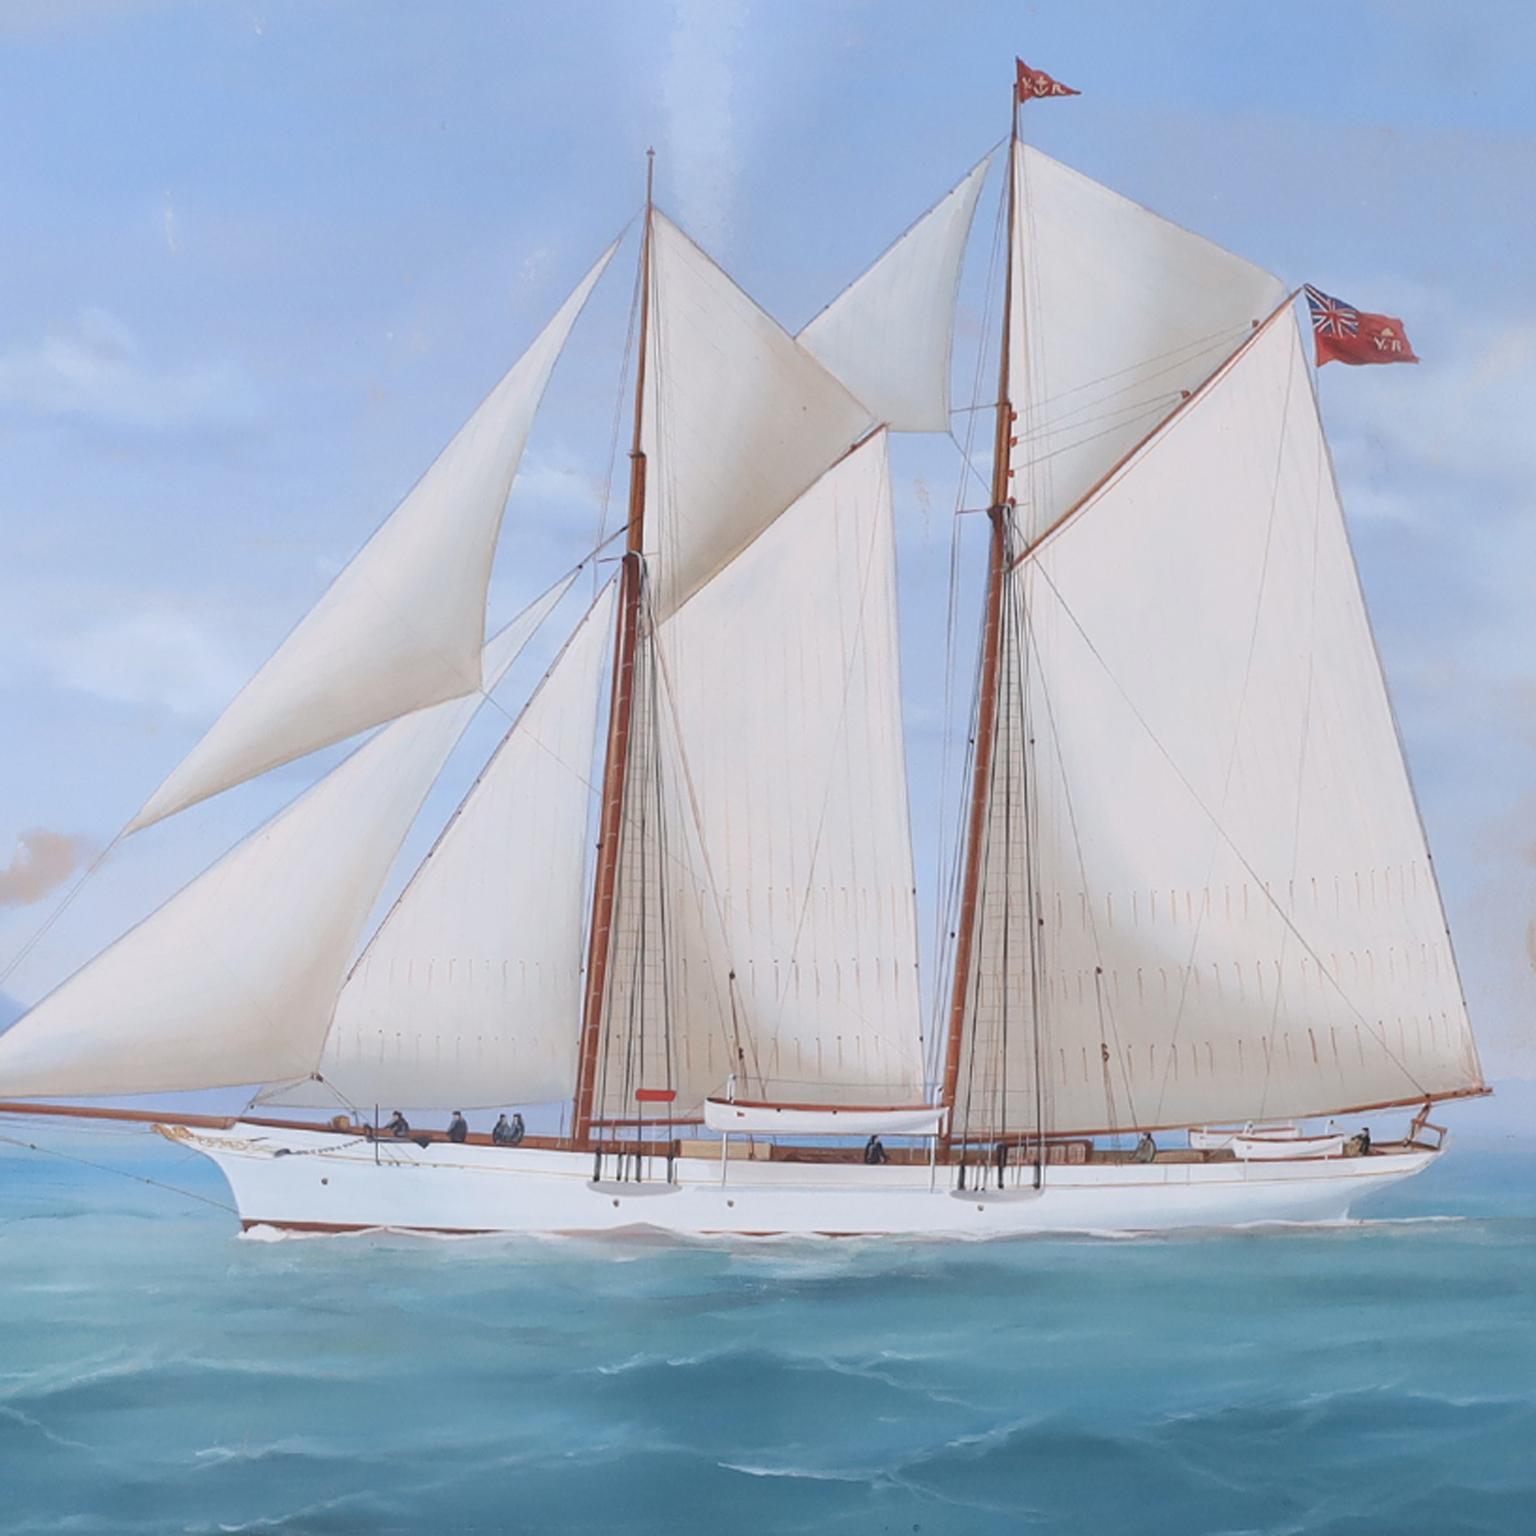 19th century painting of a Yacht, flying a British flag and named 